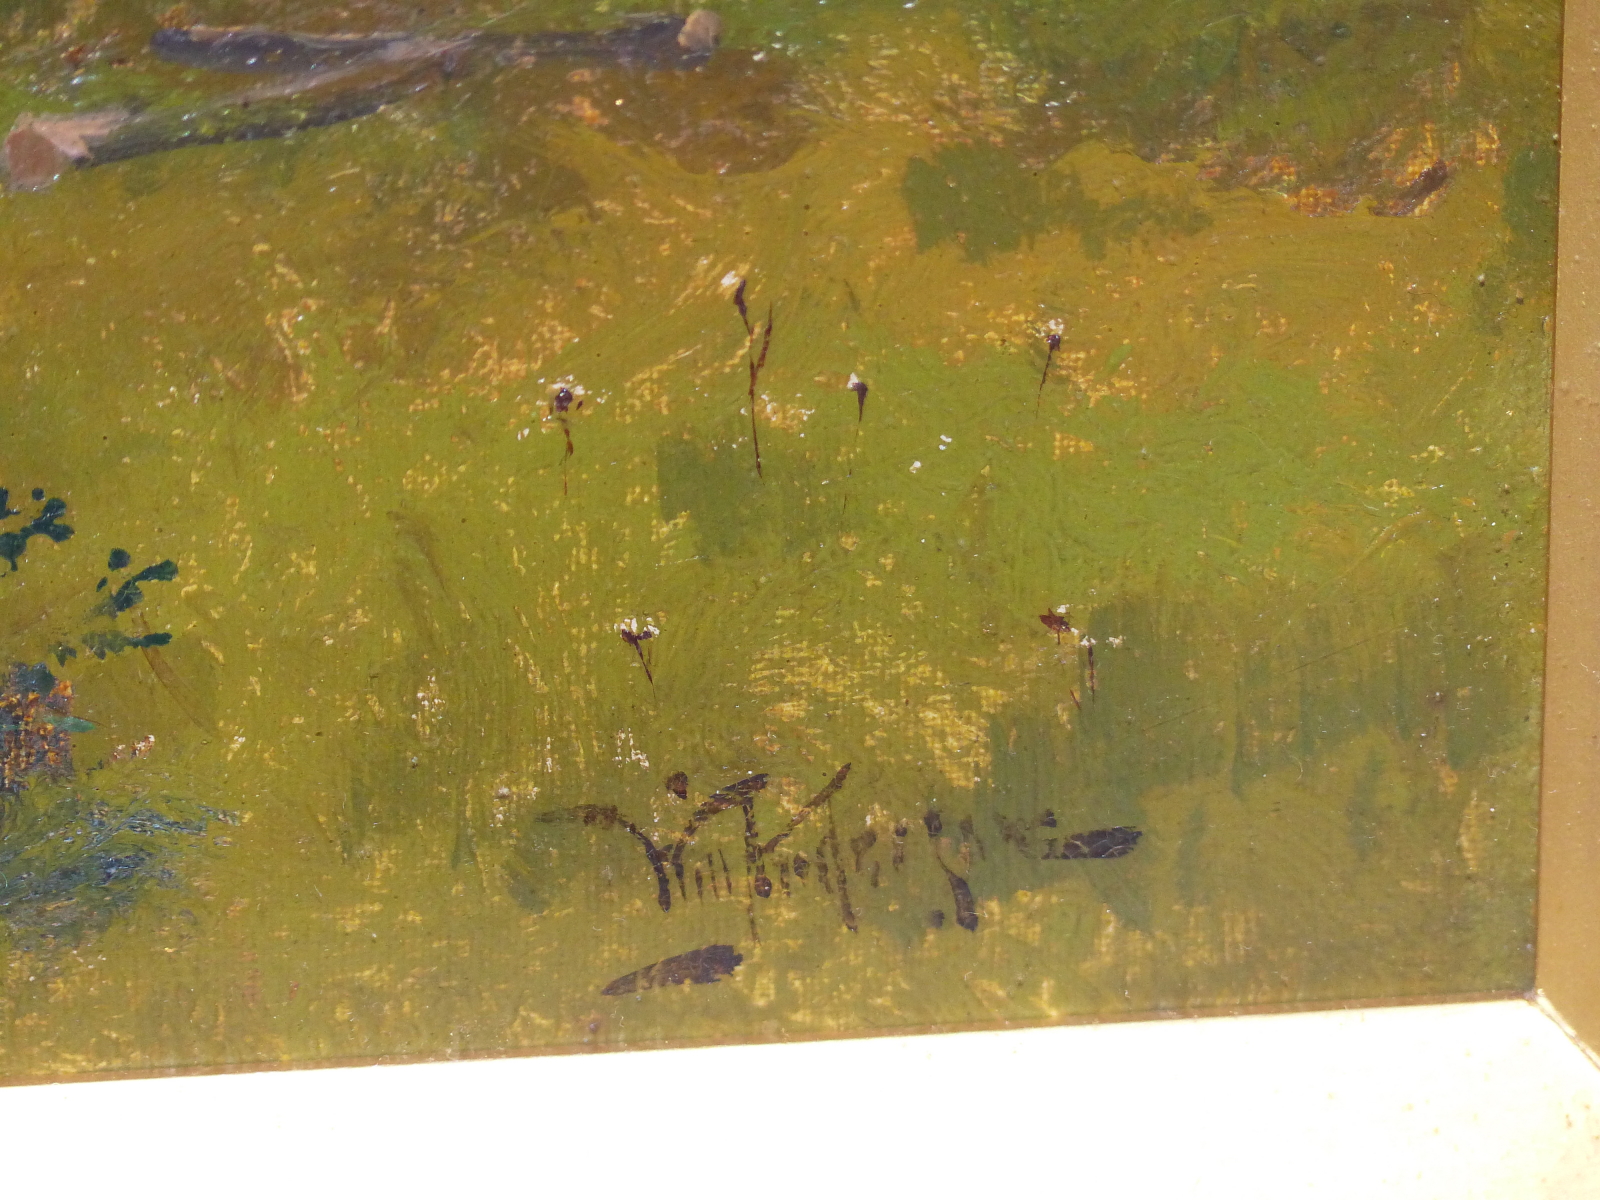 WILL ANDERSON (19TH/20TH CENTURY), GEESE BY A FARM IN AN EXTENSIVE LANDSCAPE, SIGNED LOWER RIGHT, - Image 7 of 8